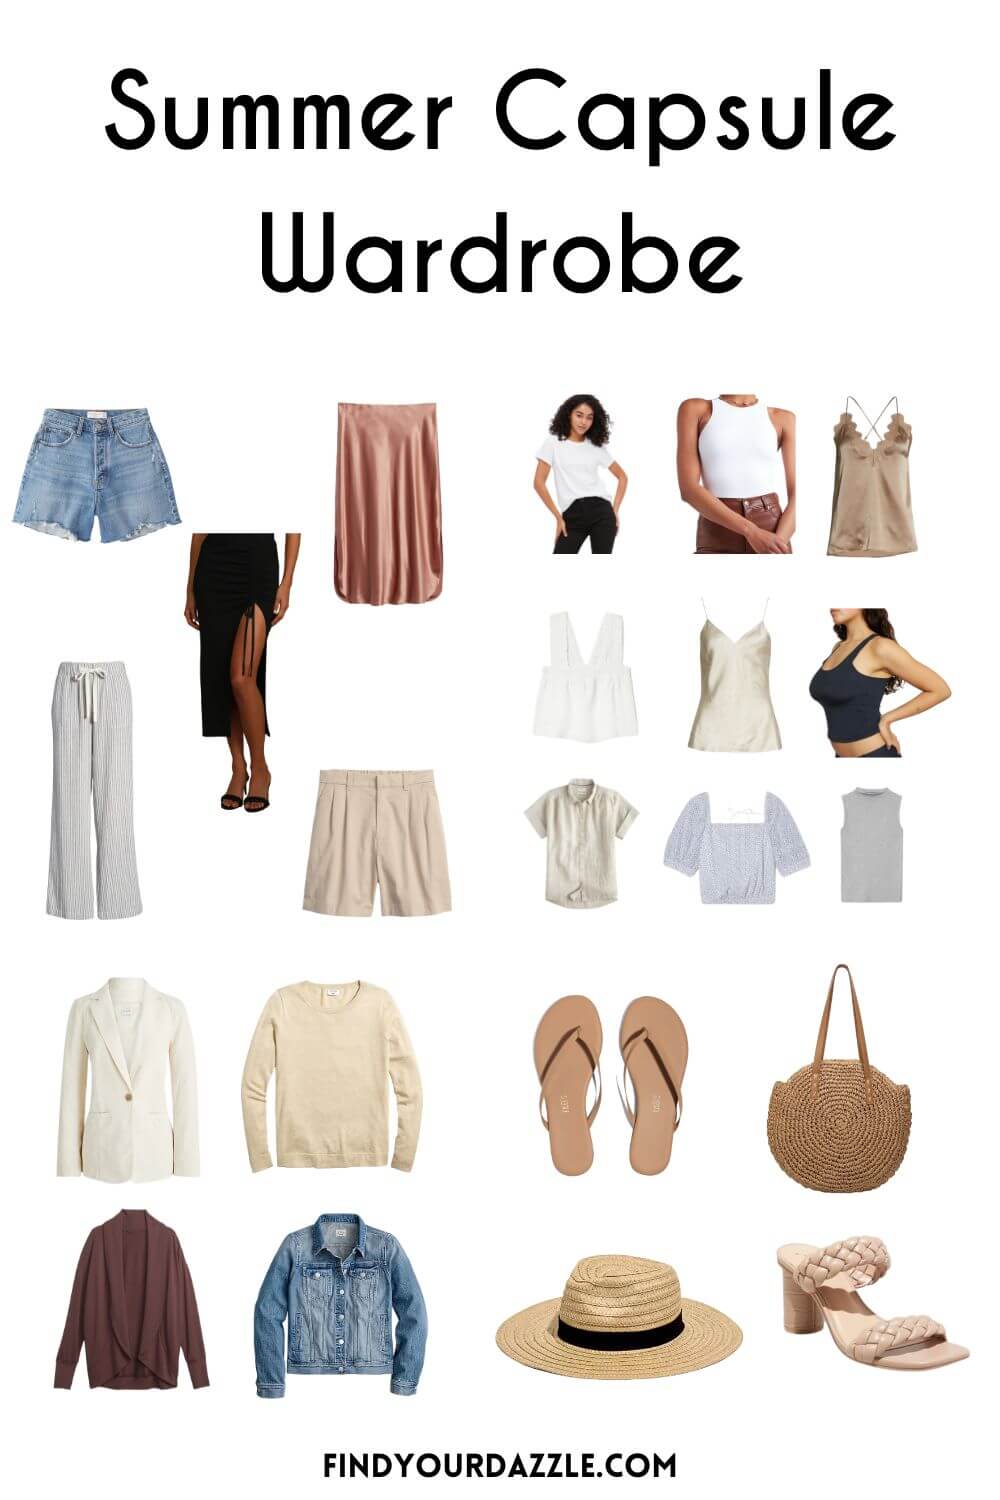 How to Make a Summer Capsule Wardrobe ⋆